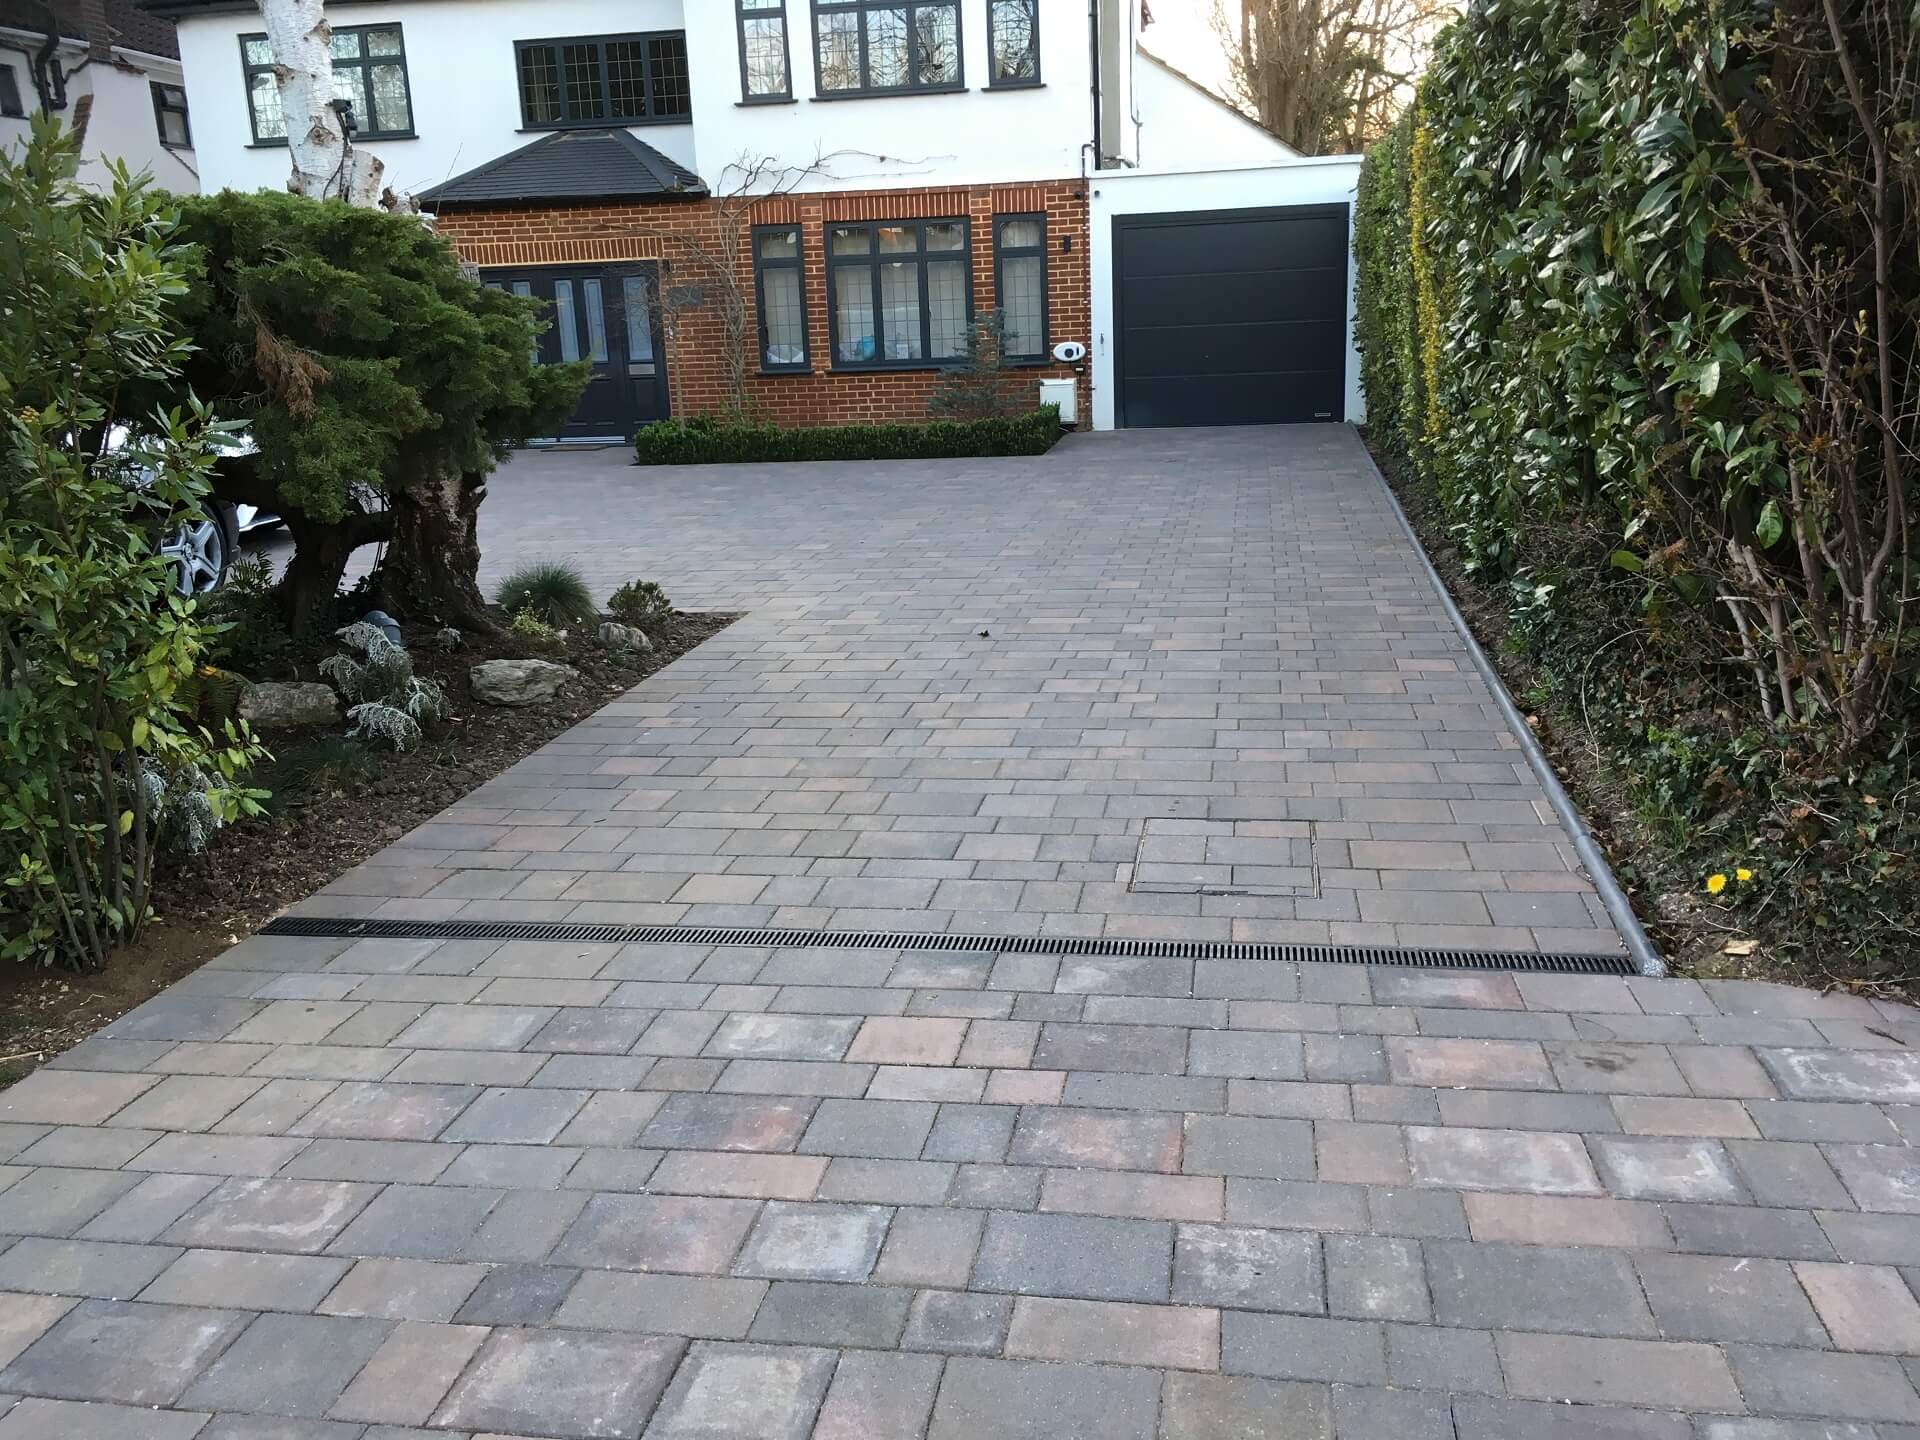 driveway built with stones and bricks